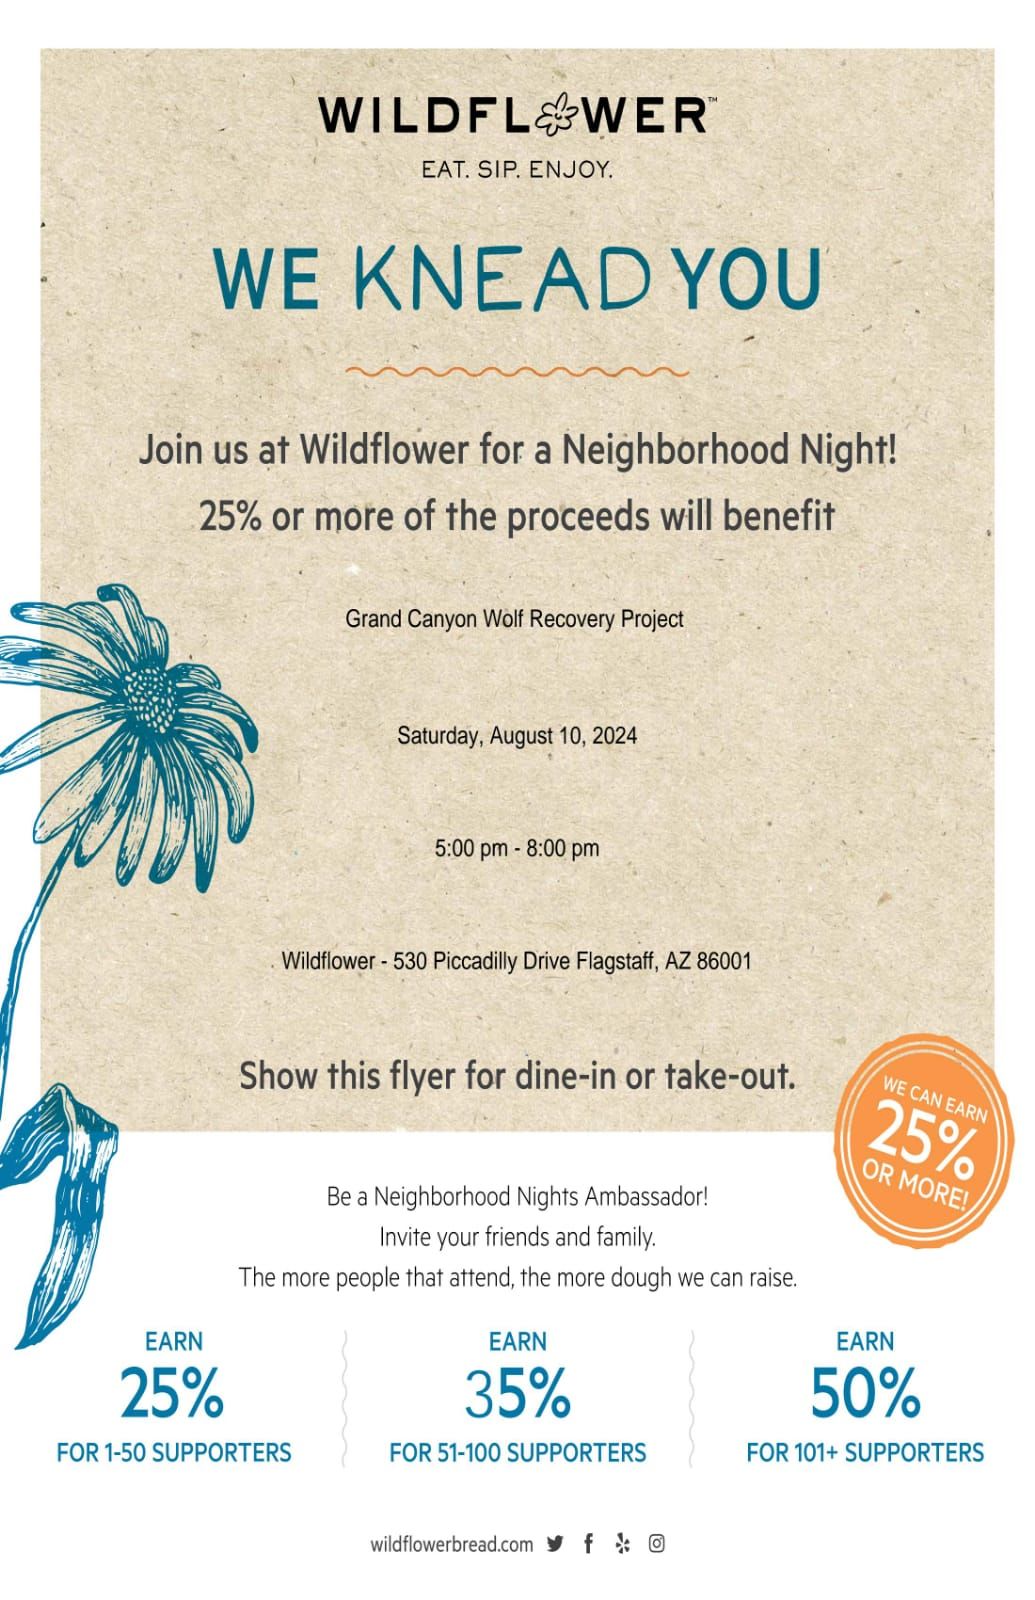  \tWildflower Neighborhood Night fundraiser for Grand Canyon Wolf Recovery Project